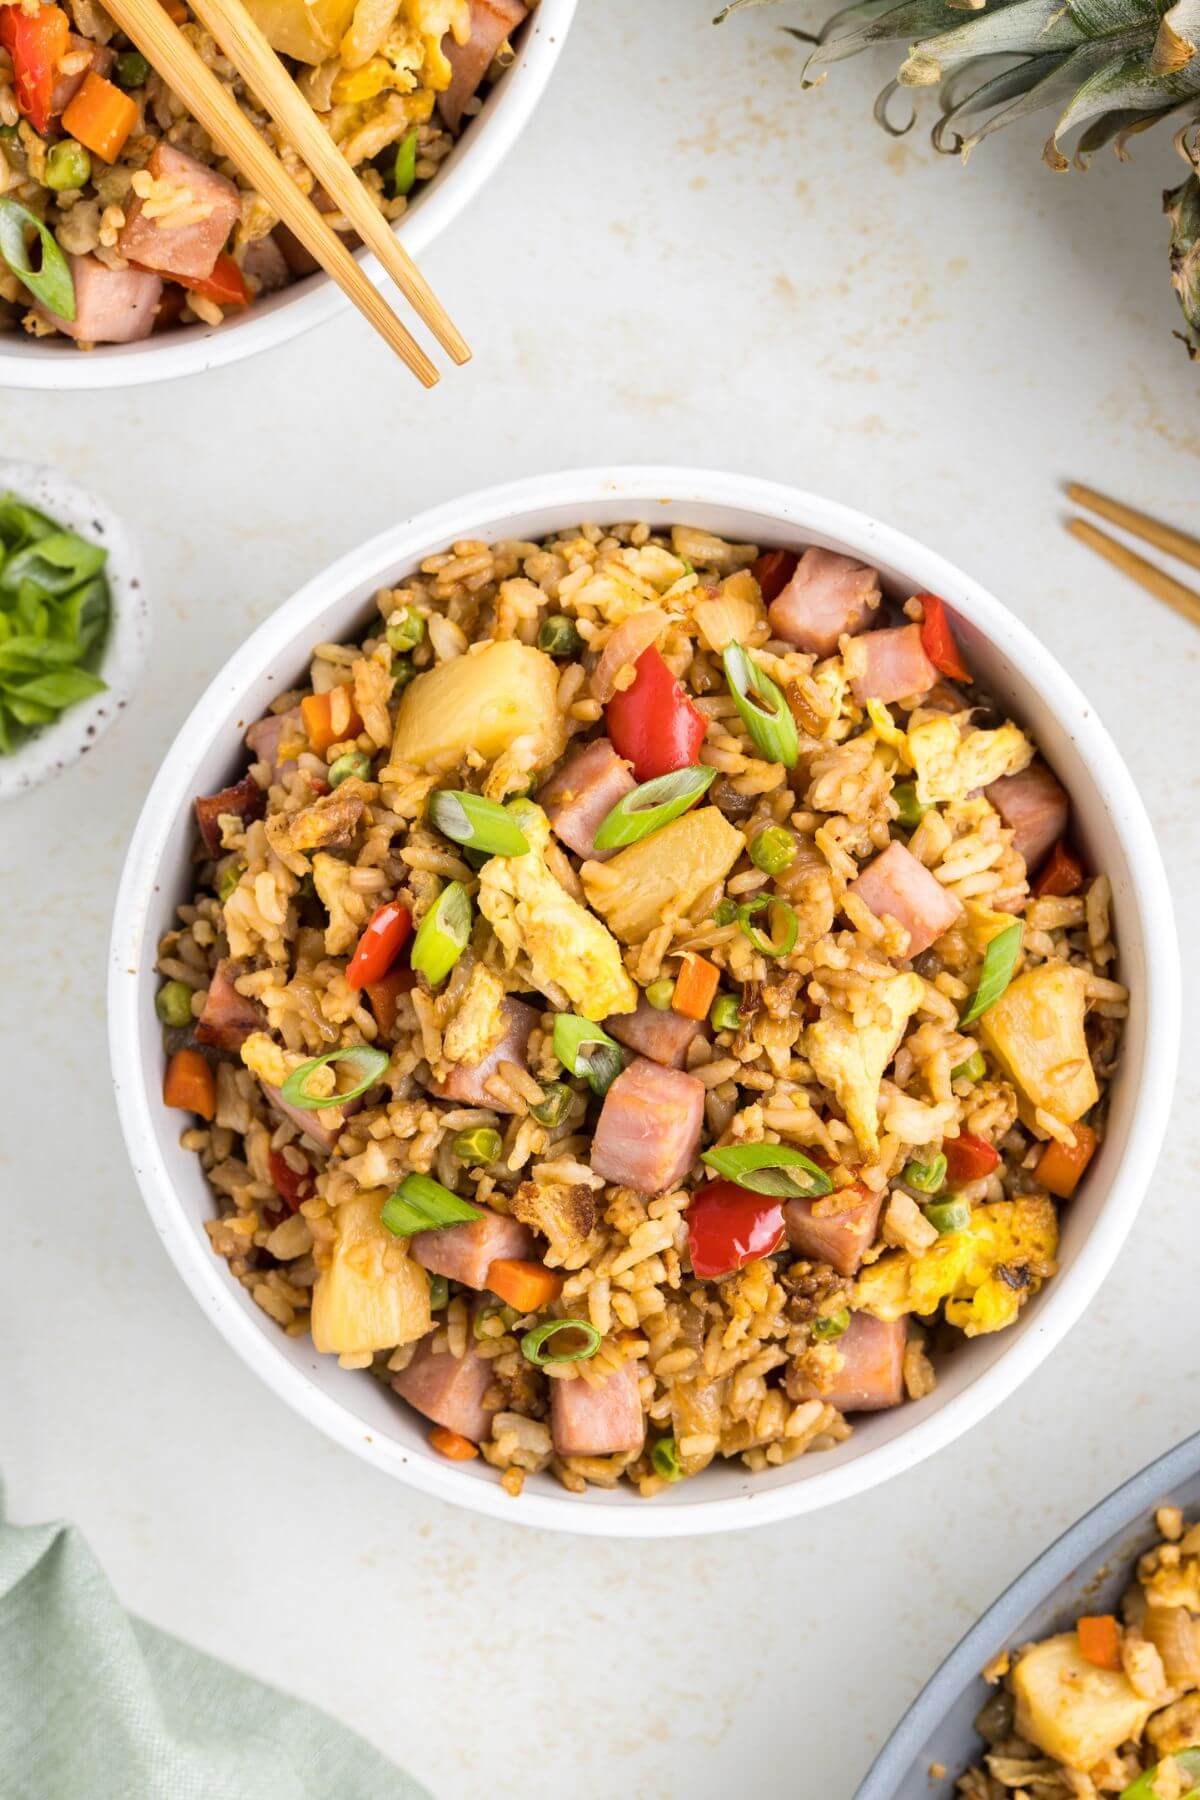 Bowls of fried rice with chopsticks are in a diagonal row.